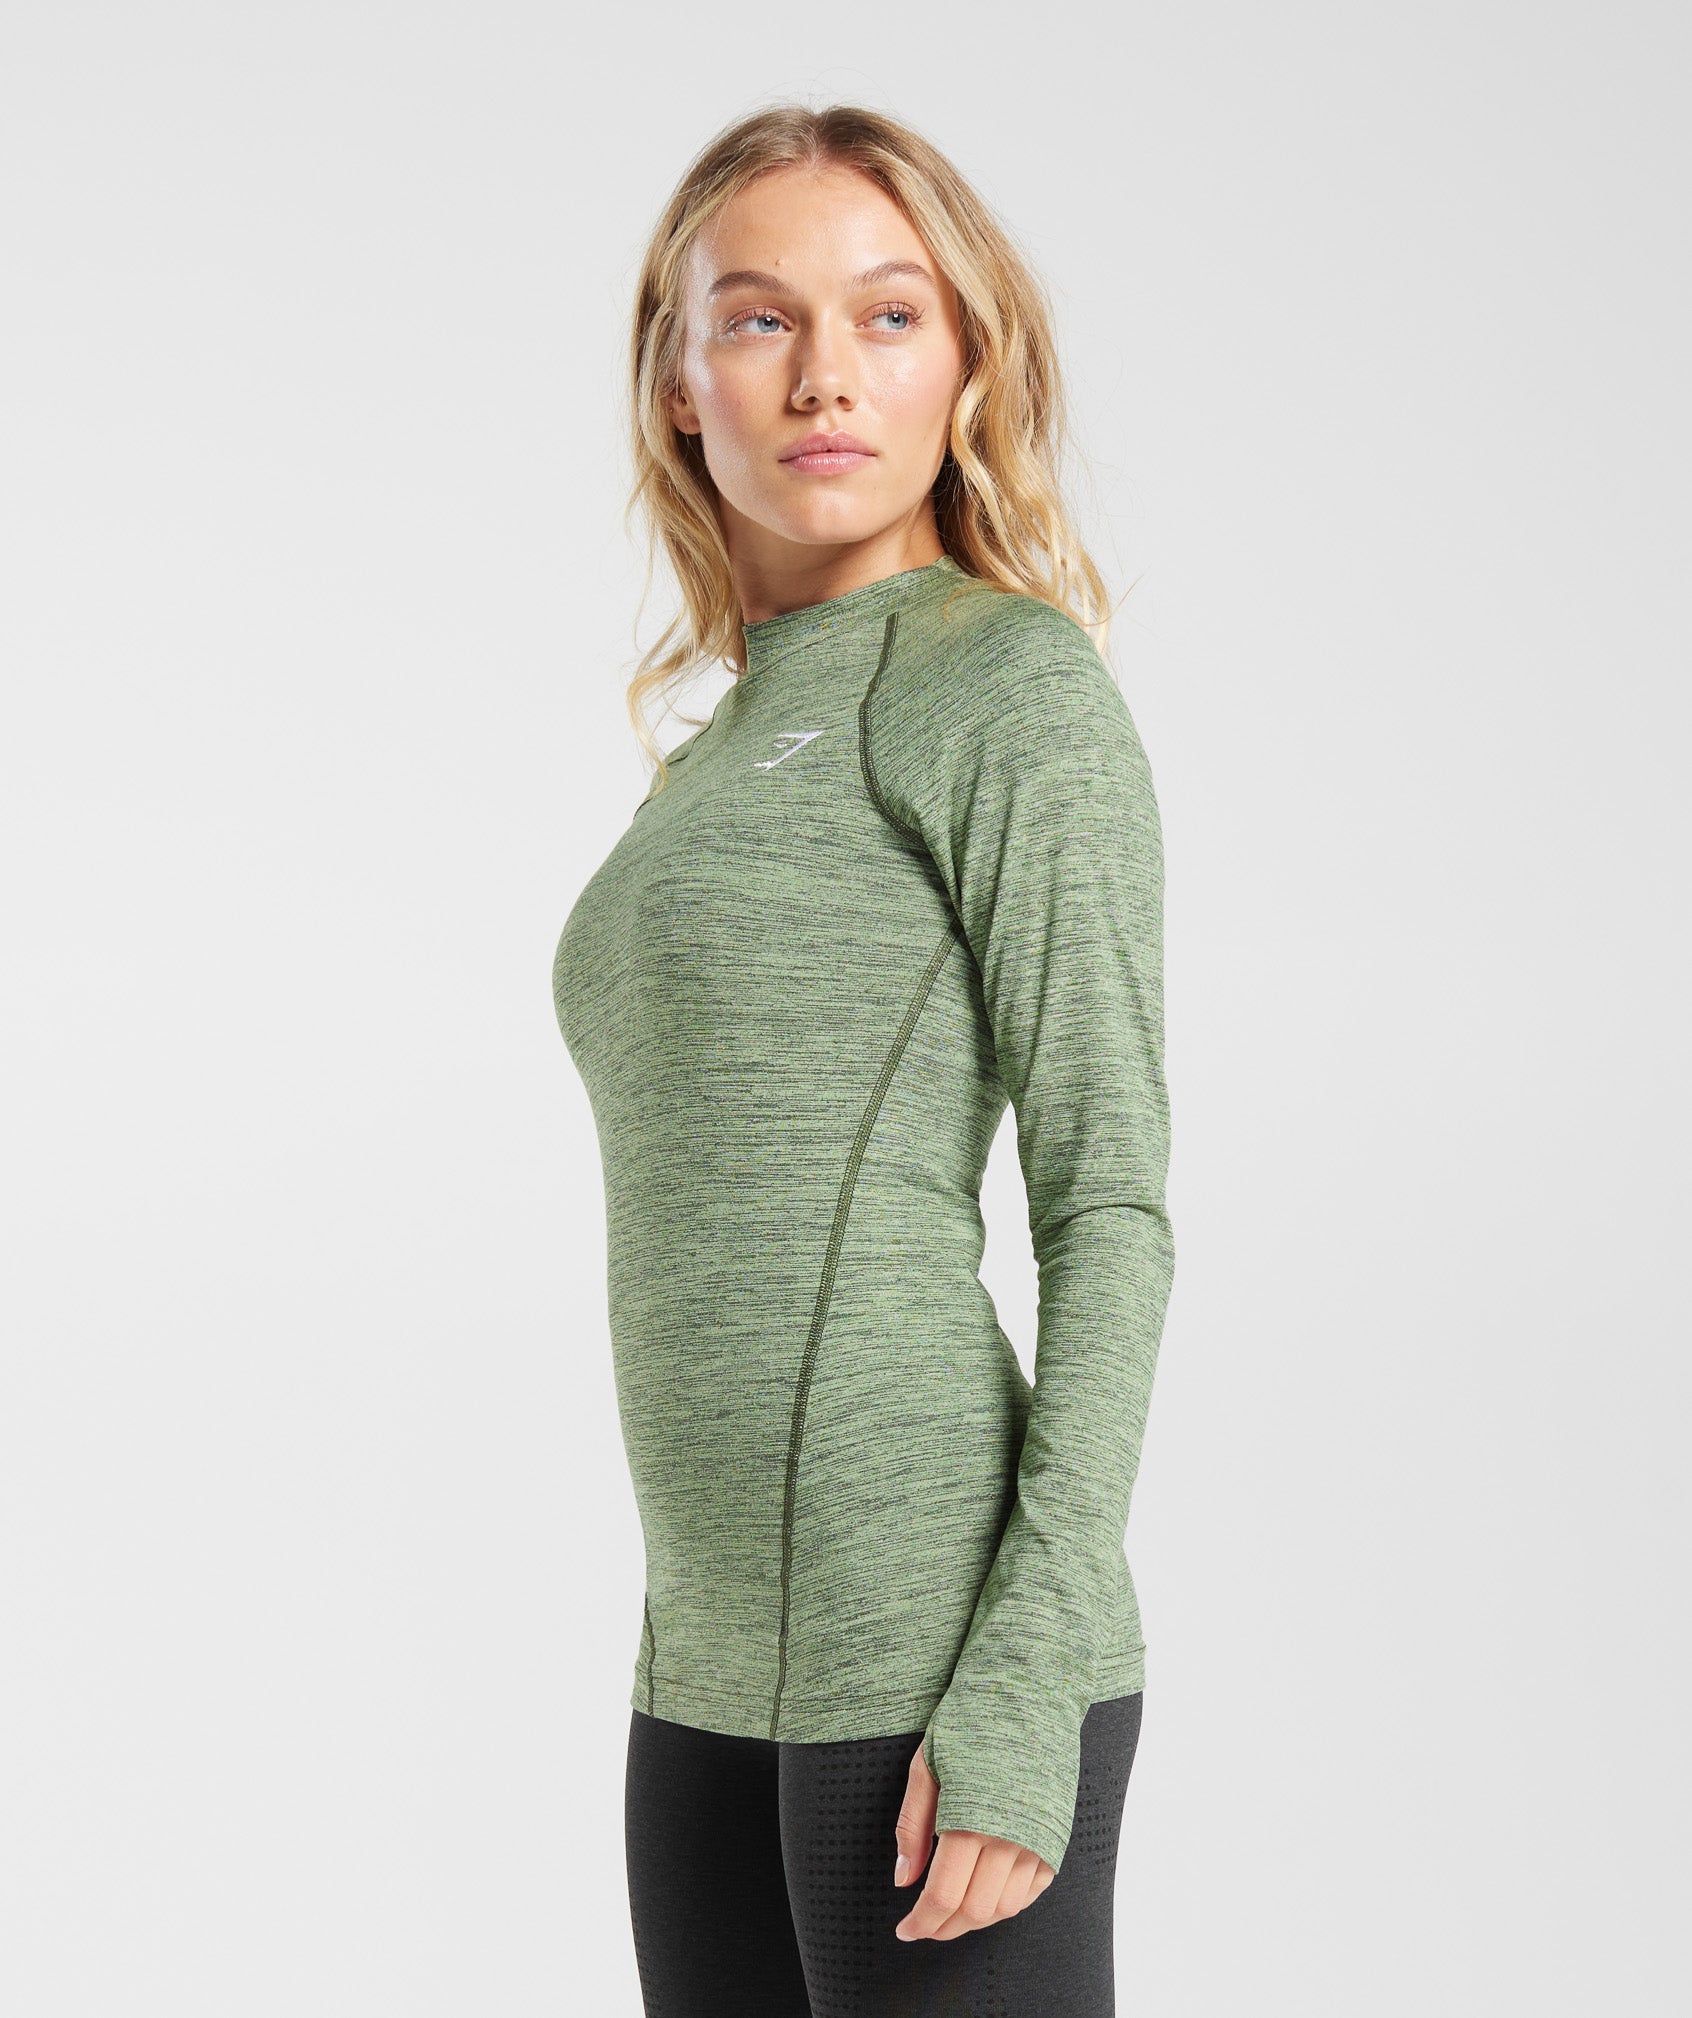 Fleece Lined Long Sleeve Top in Winter Olive/Light Sage Green - view 3